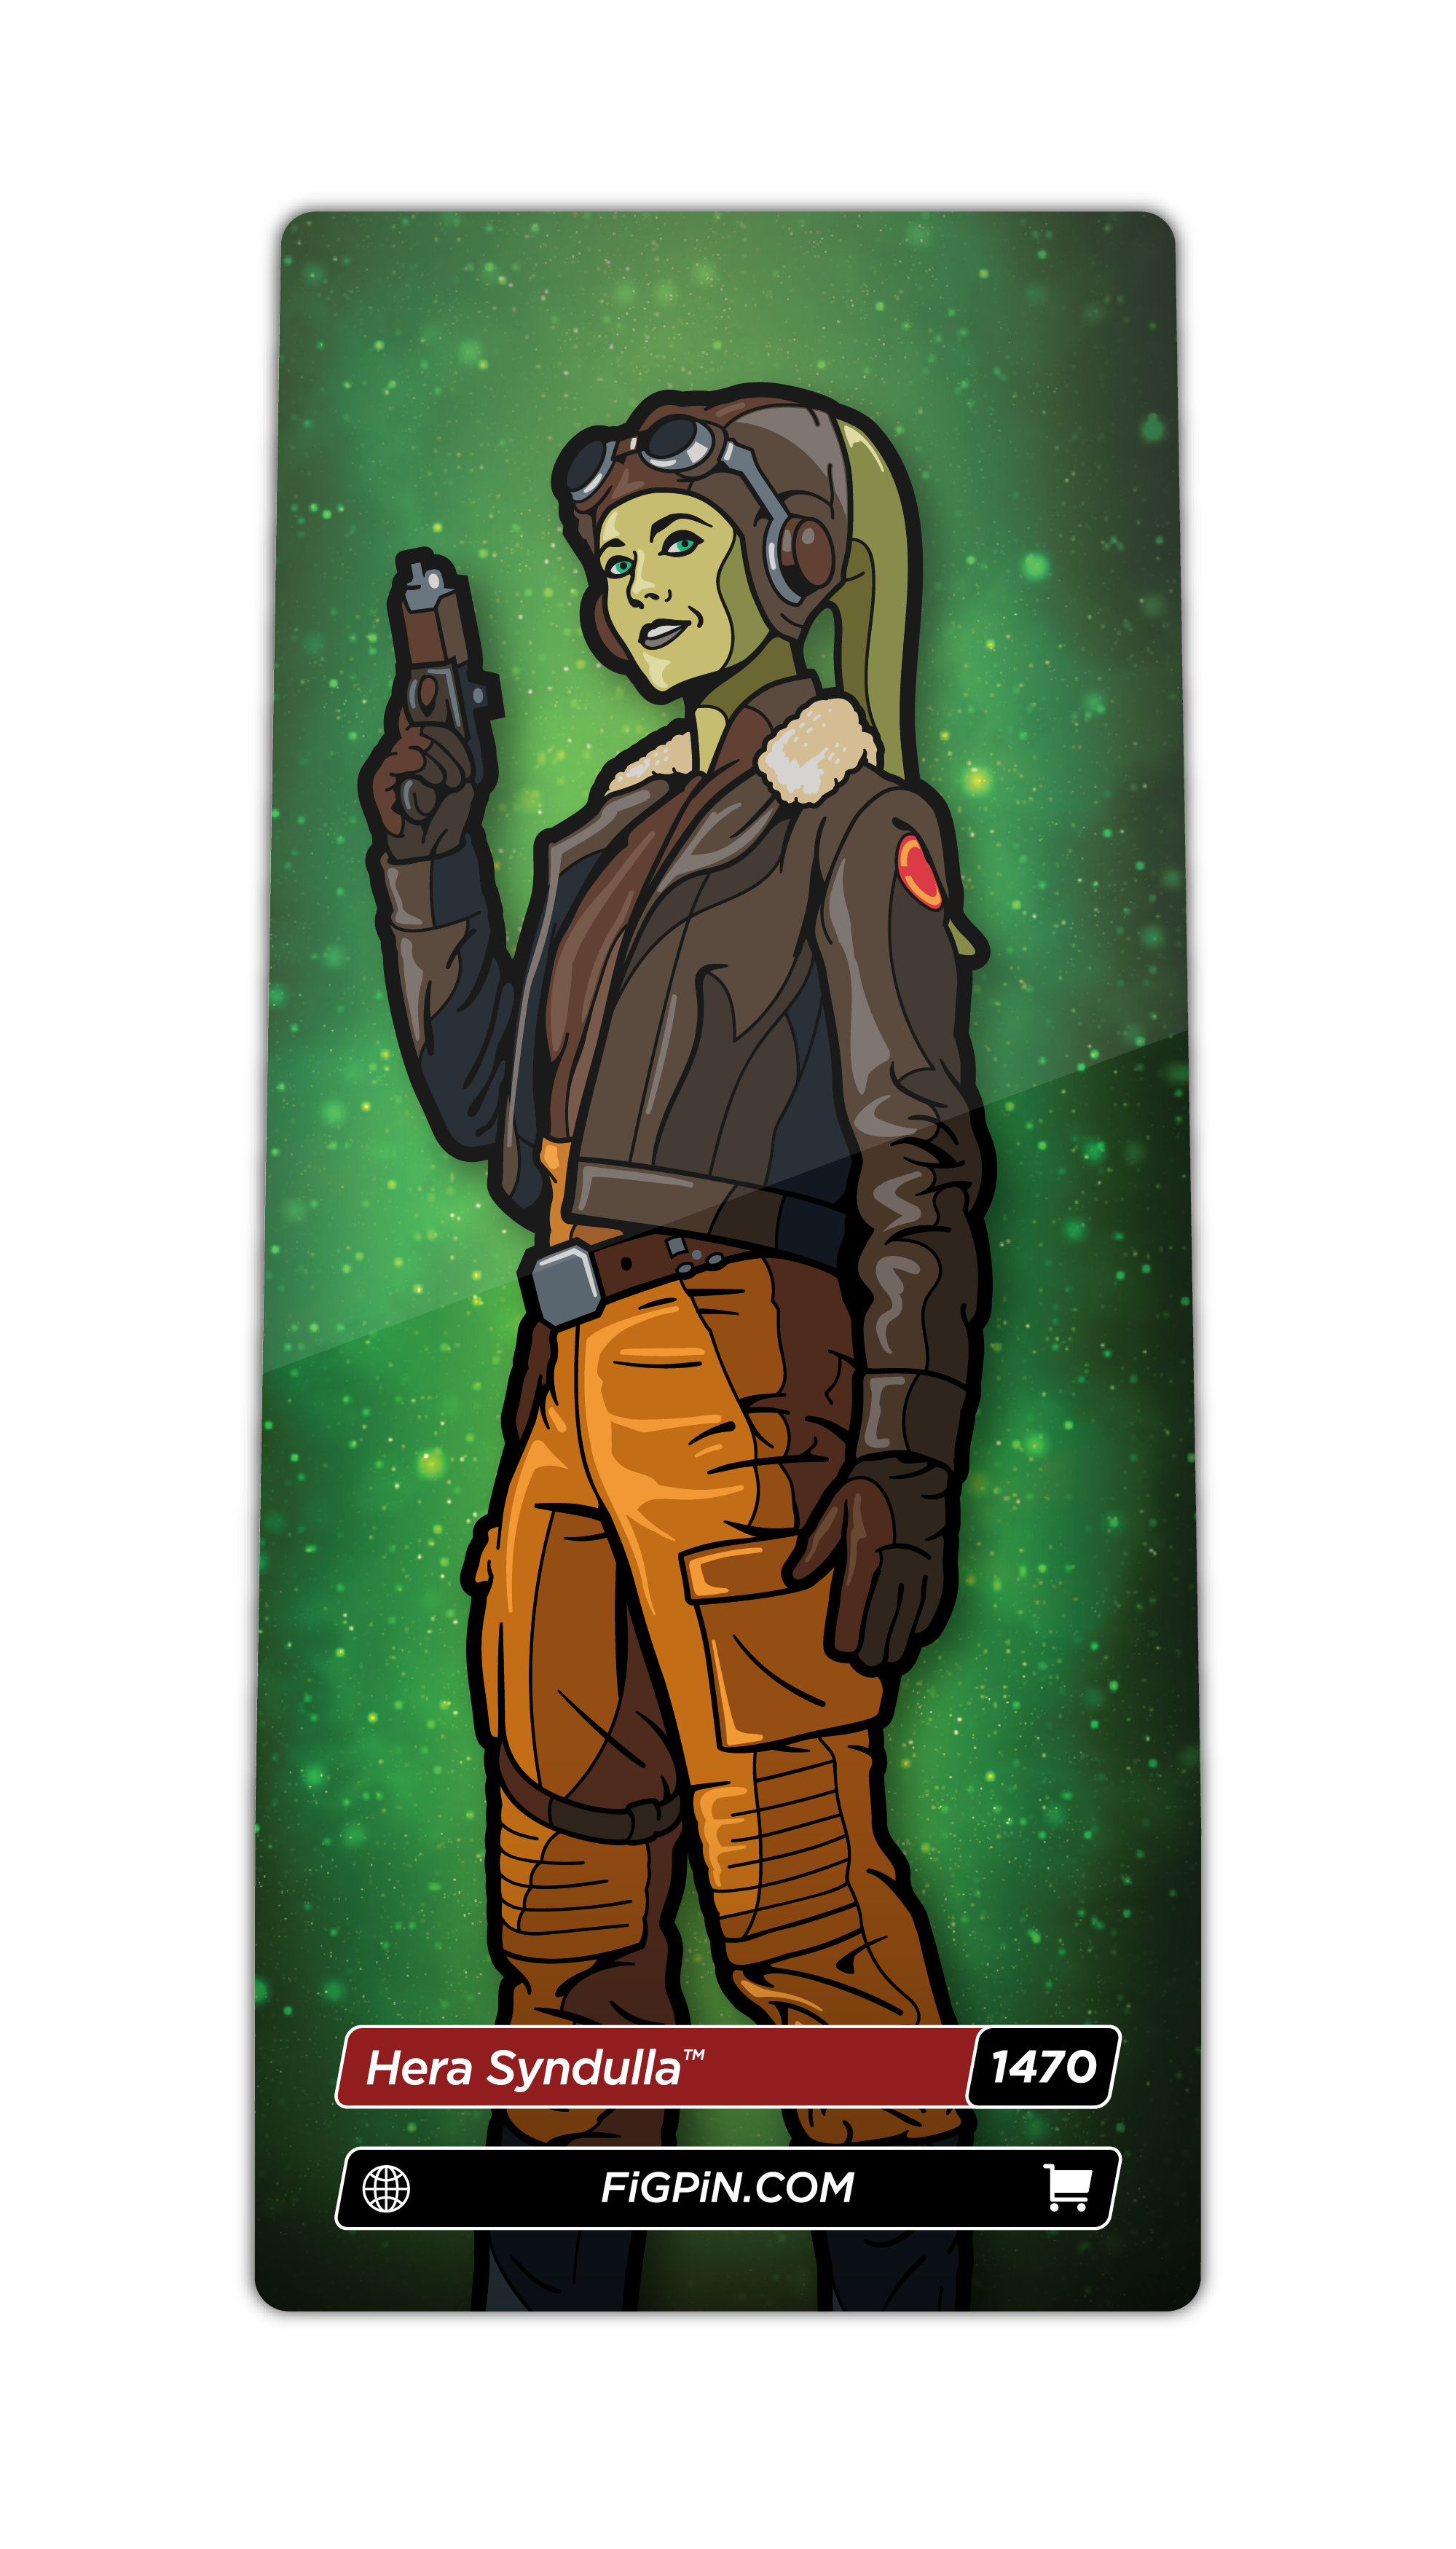 Character card of STAR WARS AHSOKA's Hera Syndulla with text “Hera Syndulla (1470)” and link to FiGPiN’s website